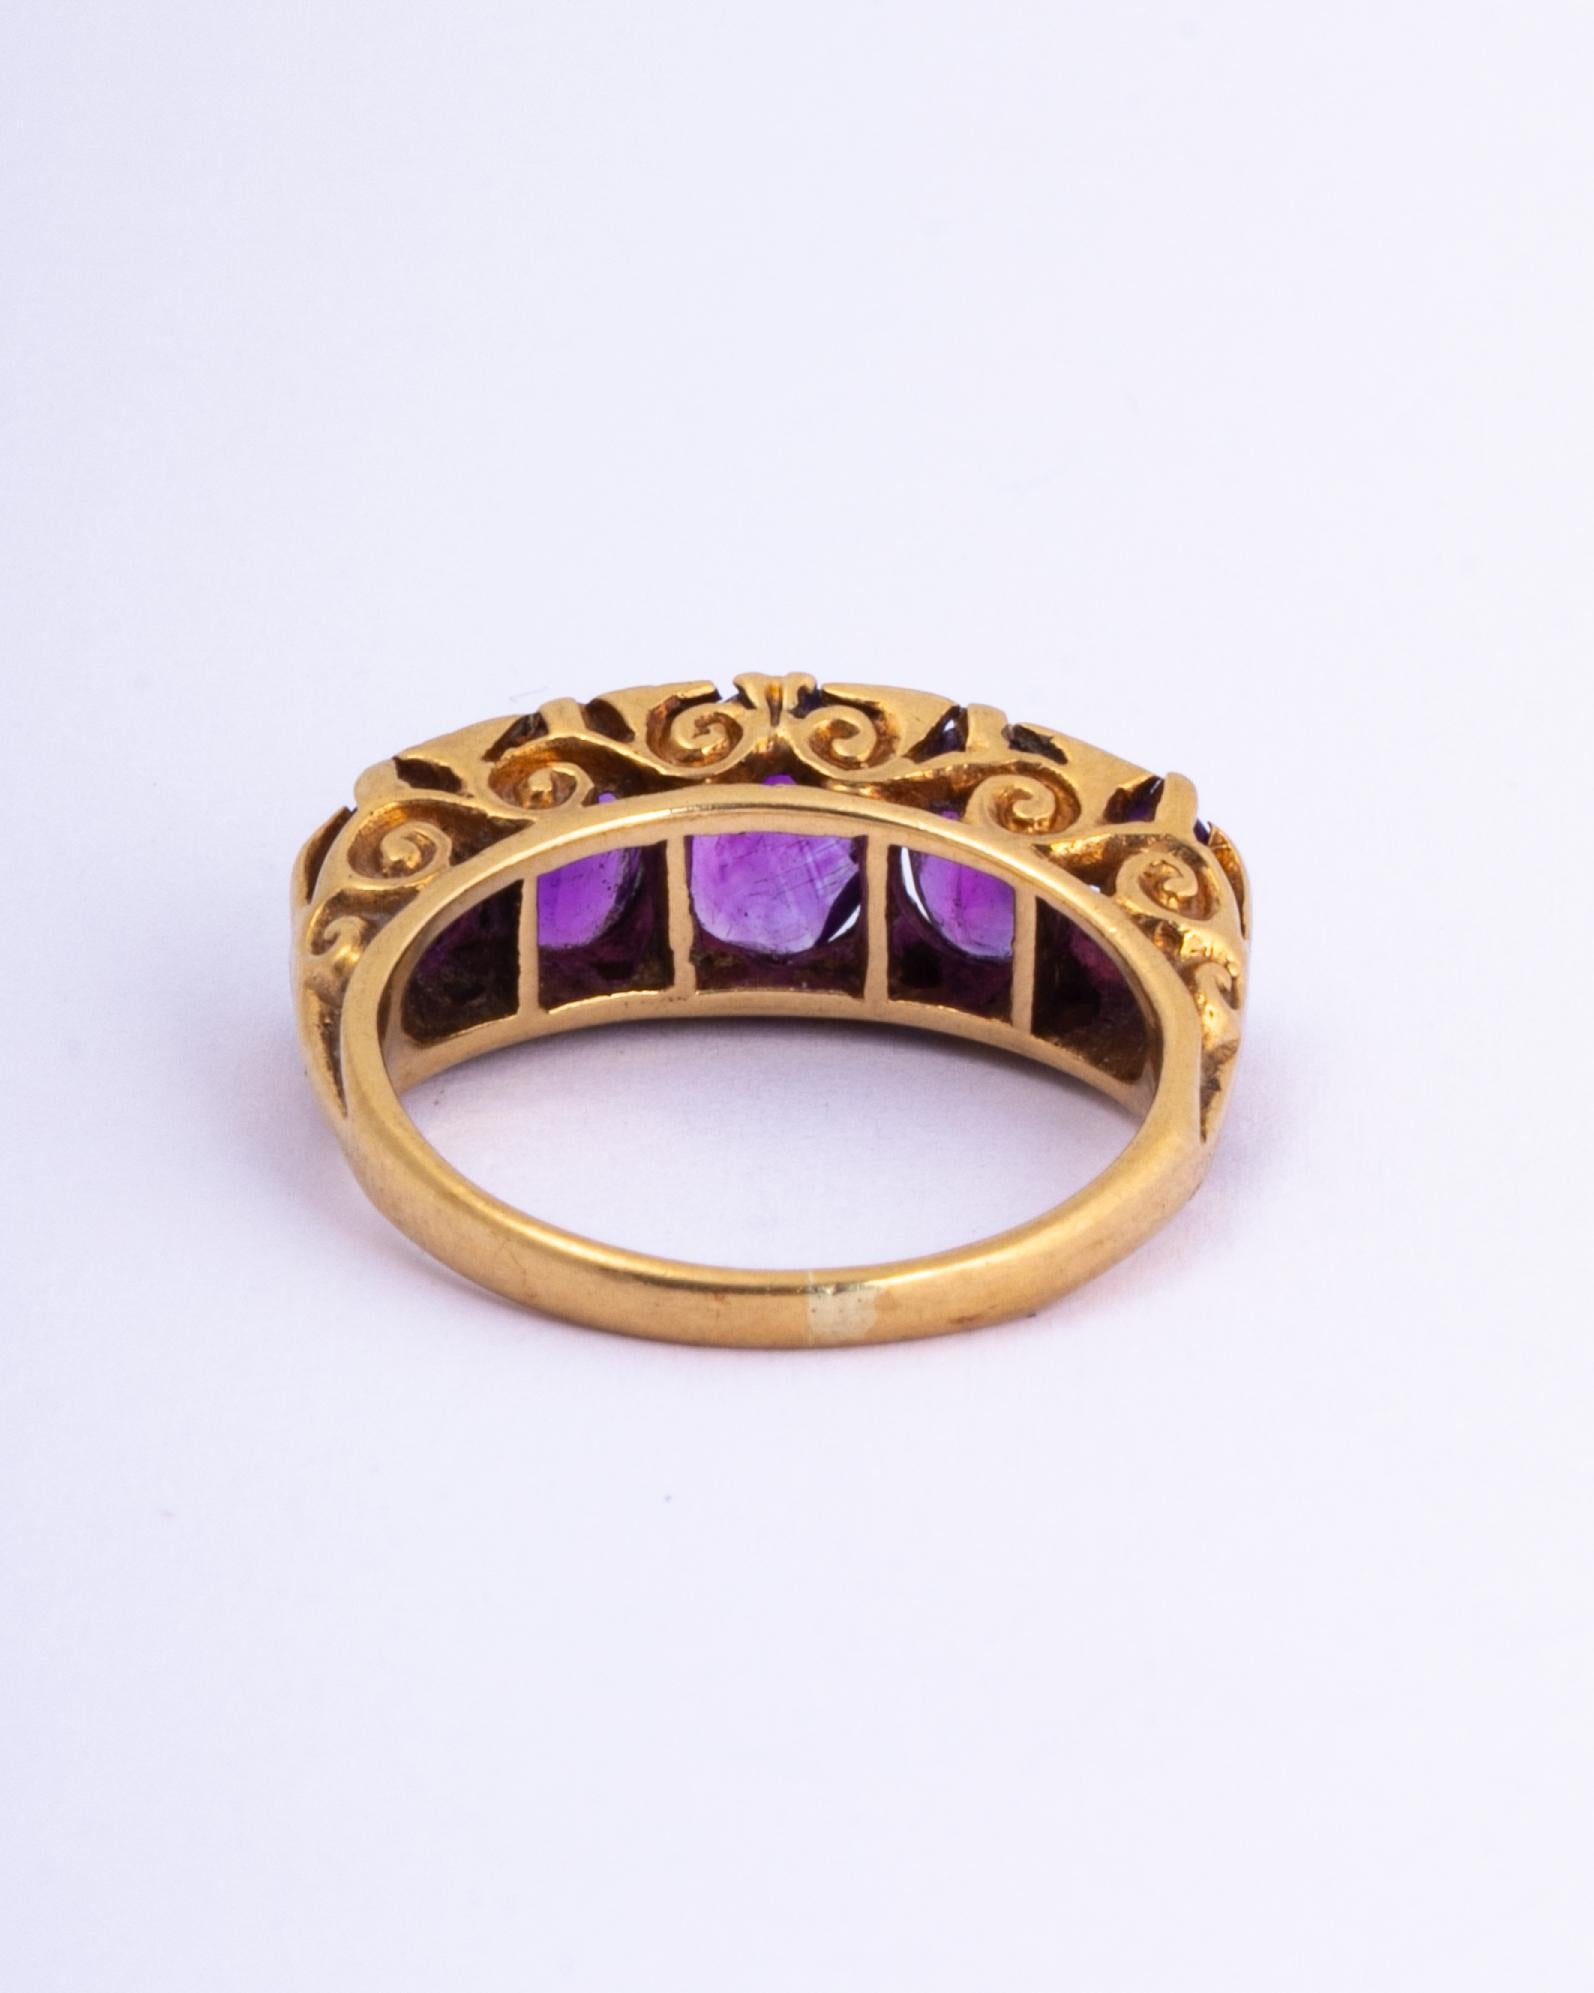 Oval Cut Vintage Amethyst Five-Stone with Diamond Points Modelled in 9 Carat Gold